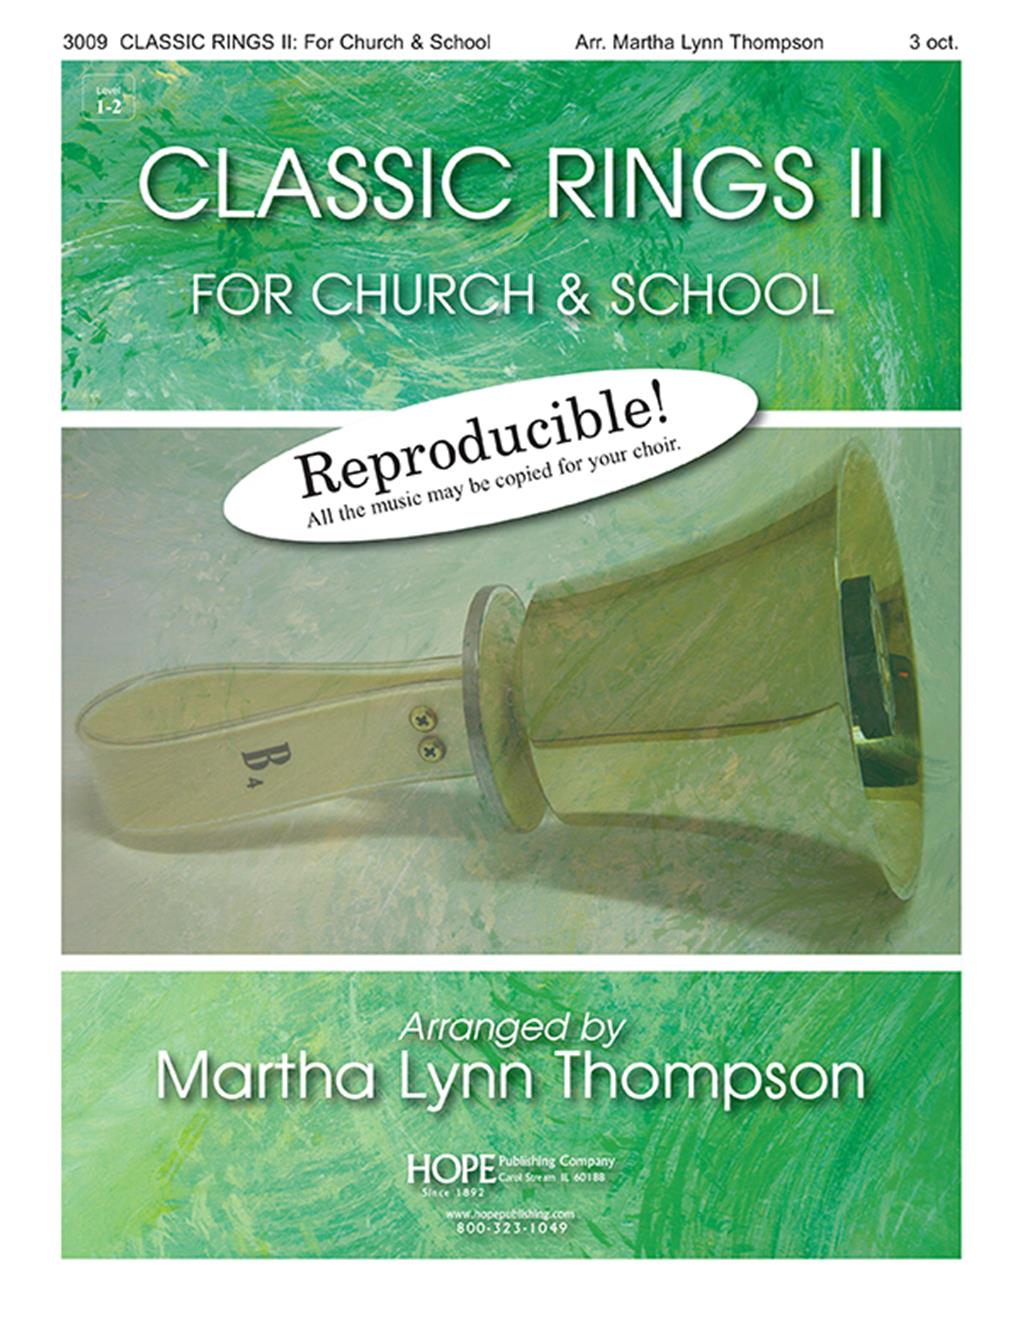 Classic Rings II: For Church and School - 3 Oct. Reproducible Cover Image